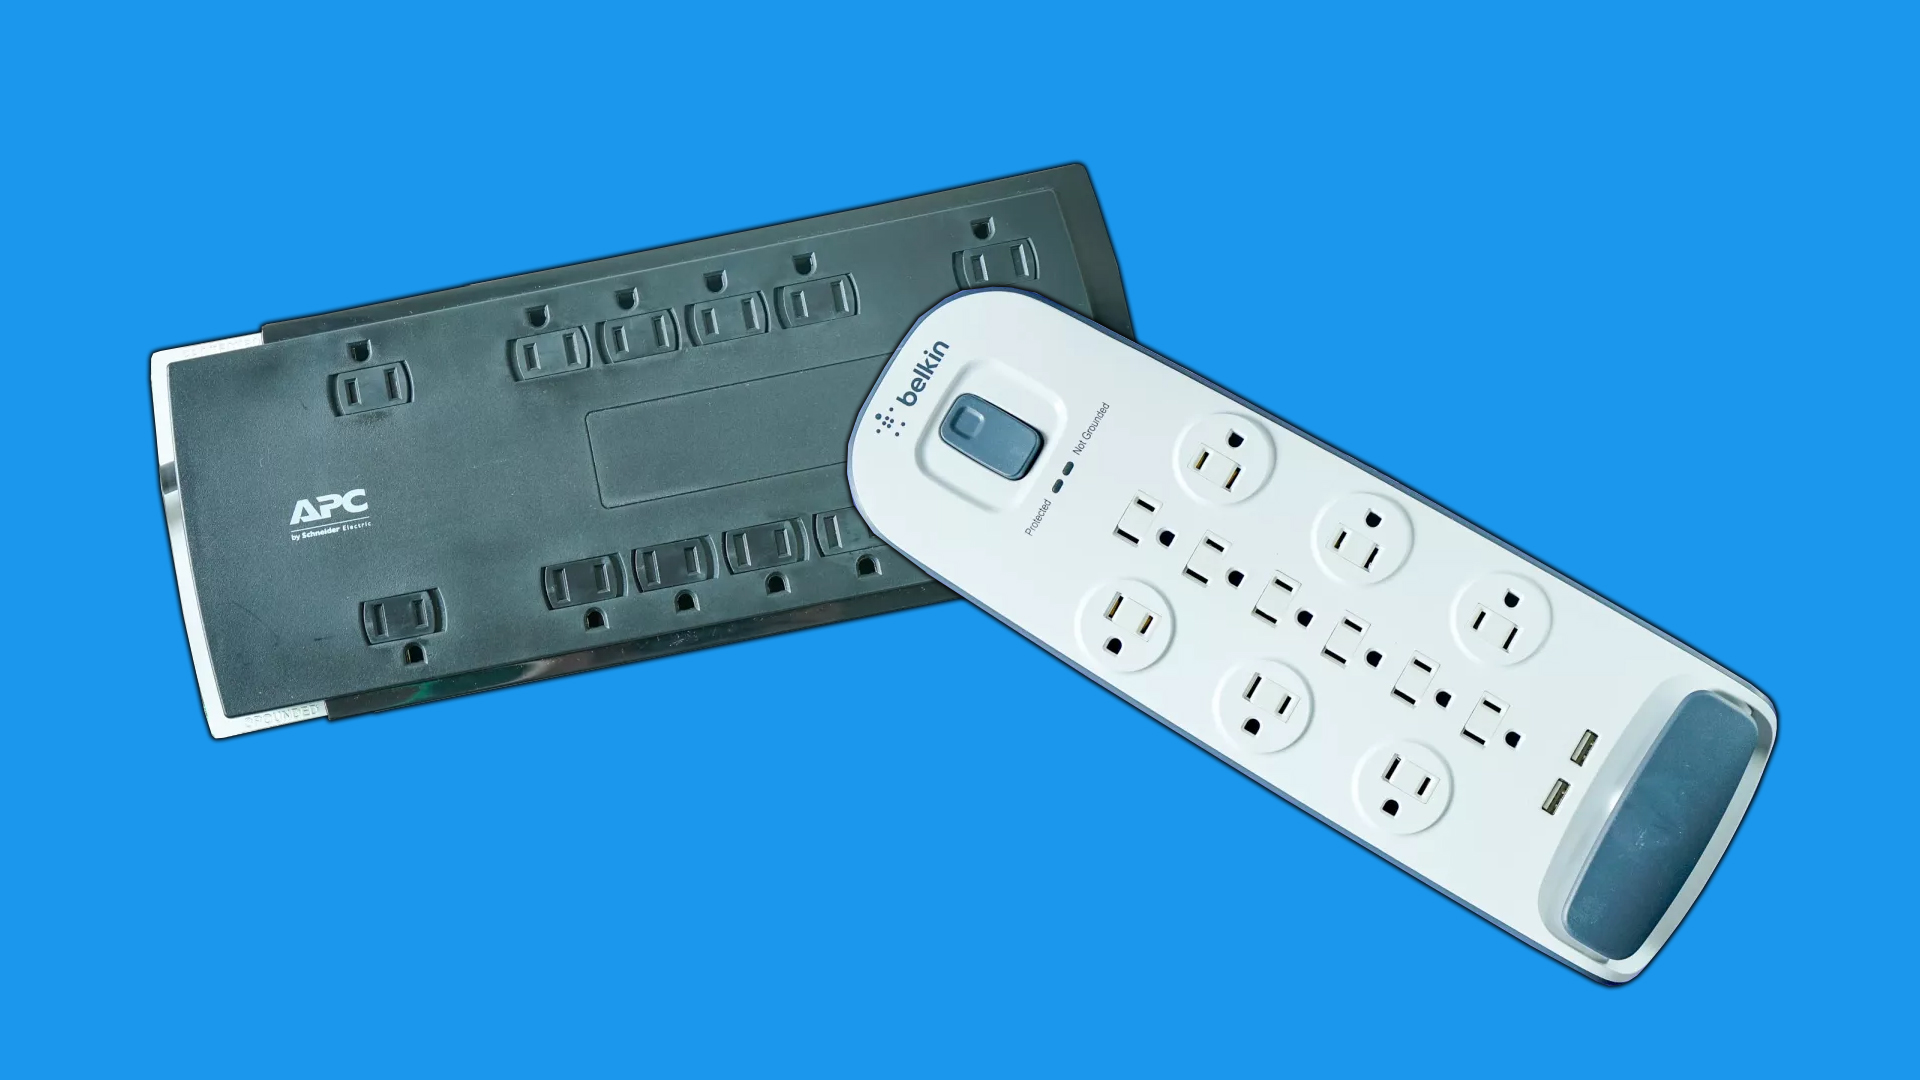 Save on Smart Living Surge Protector 6-Outlet Indoor 3 Feet Order